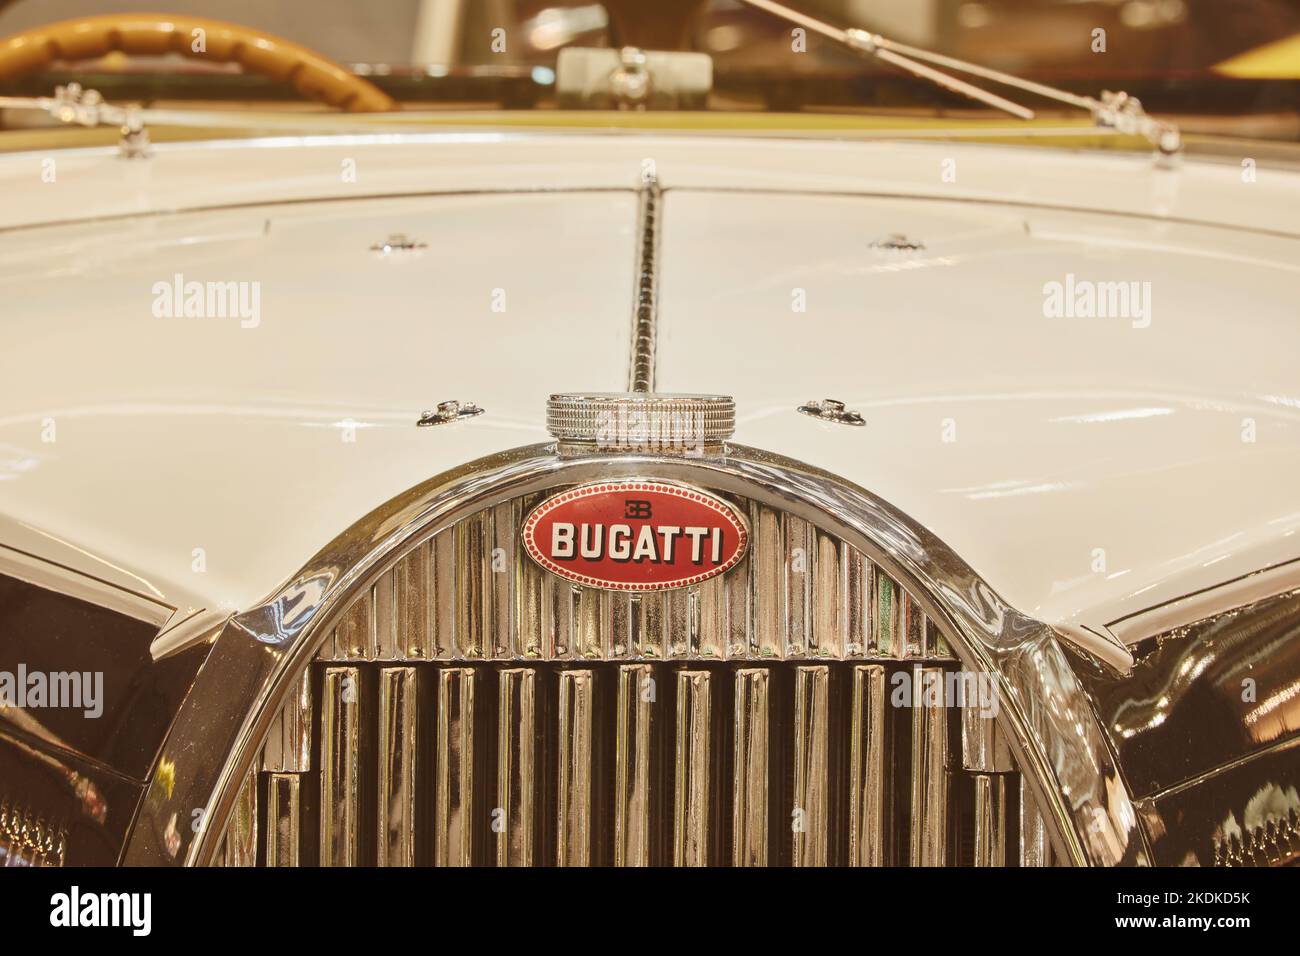 Essen, Germany - March 23, 2022: Retro styled image of a classic white Bugatti limousine car in Essen, Germany Stock Photo